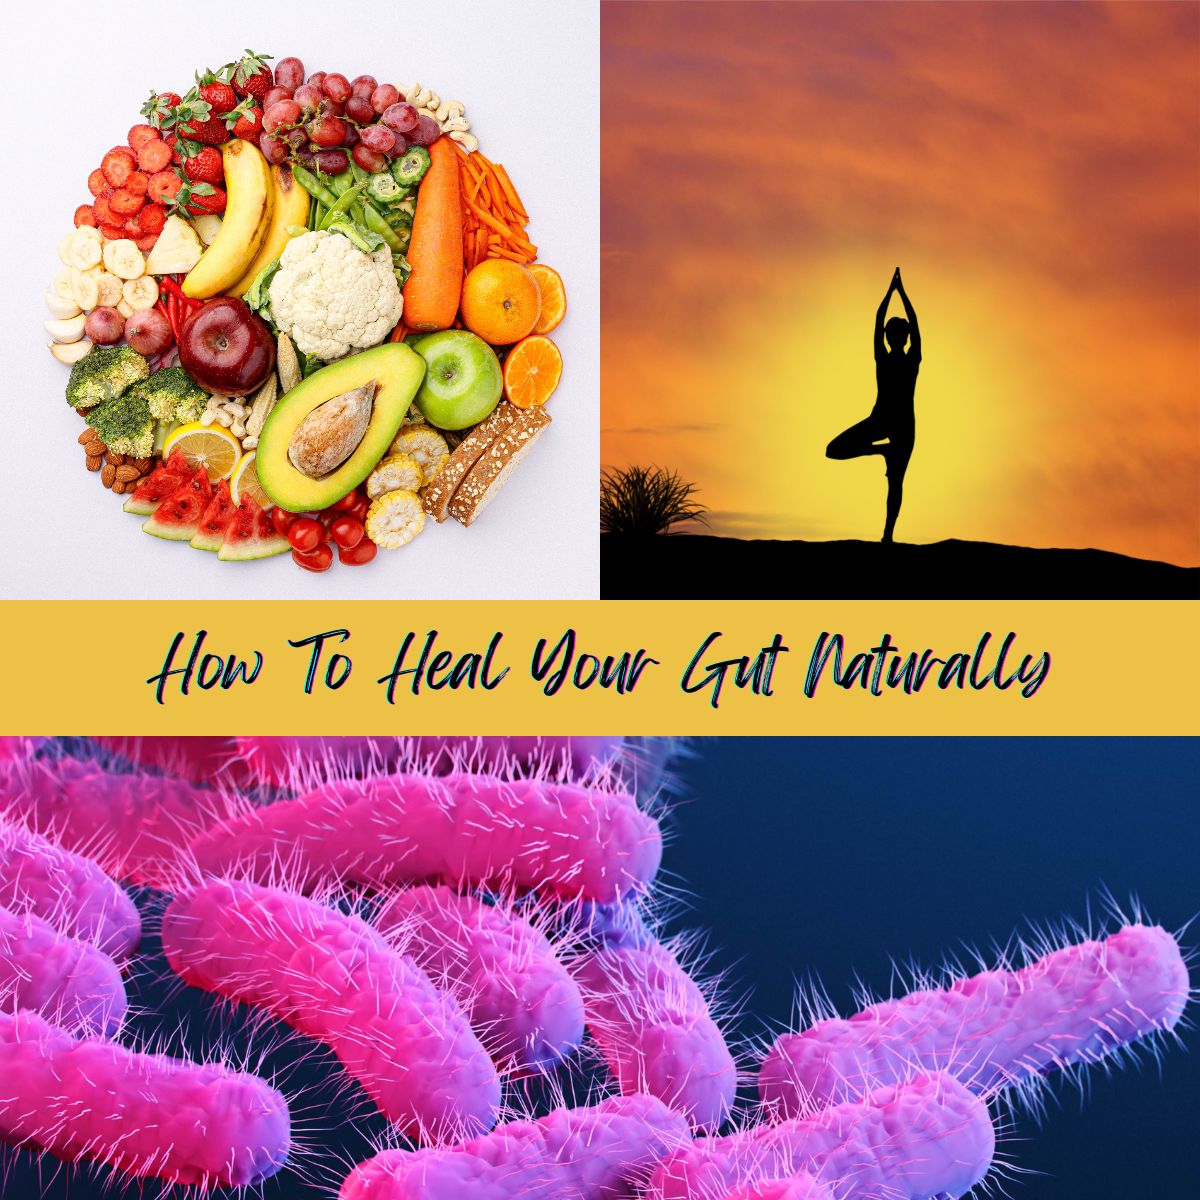 Picture of fresh fruits and vegetables, a picture of a woman doing yoga, and a picture of bacteria.